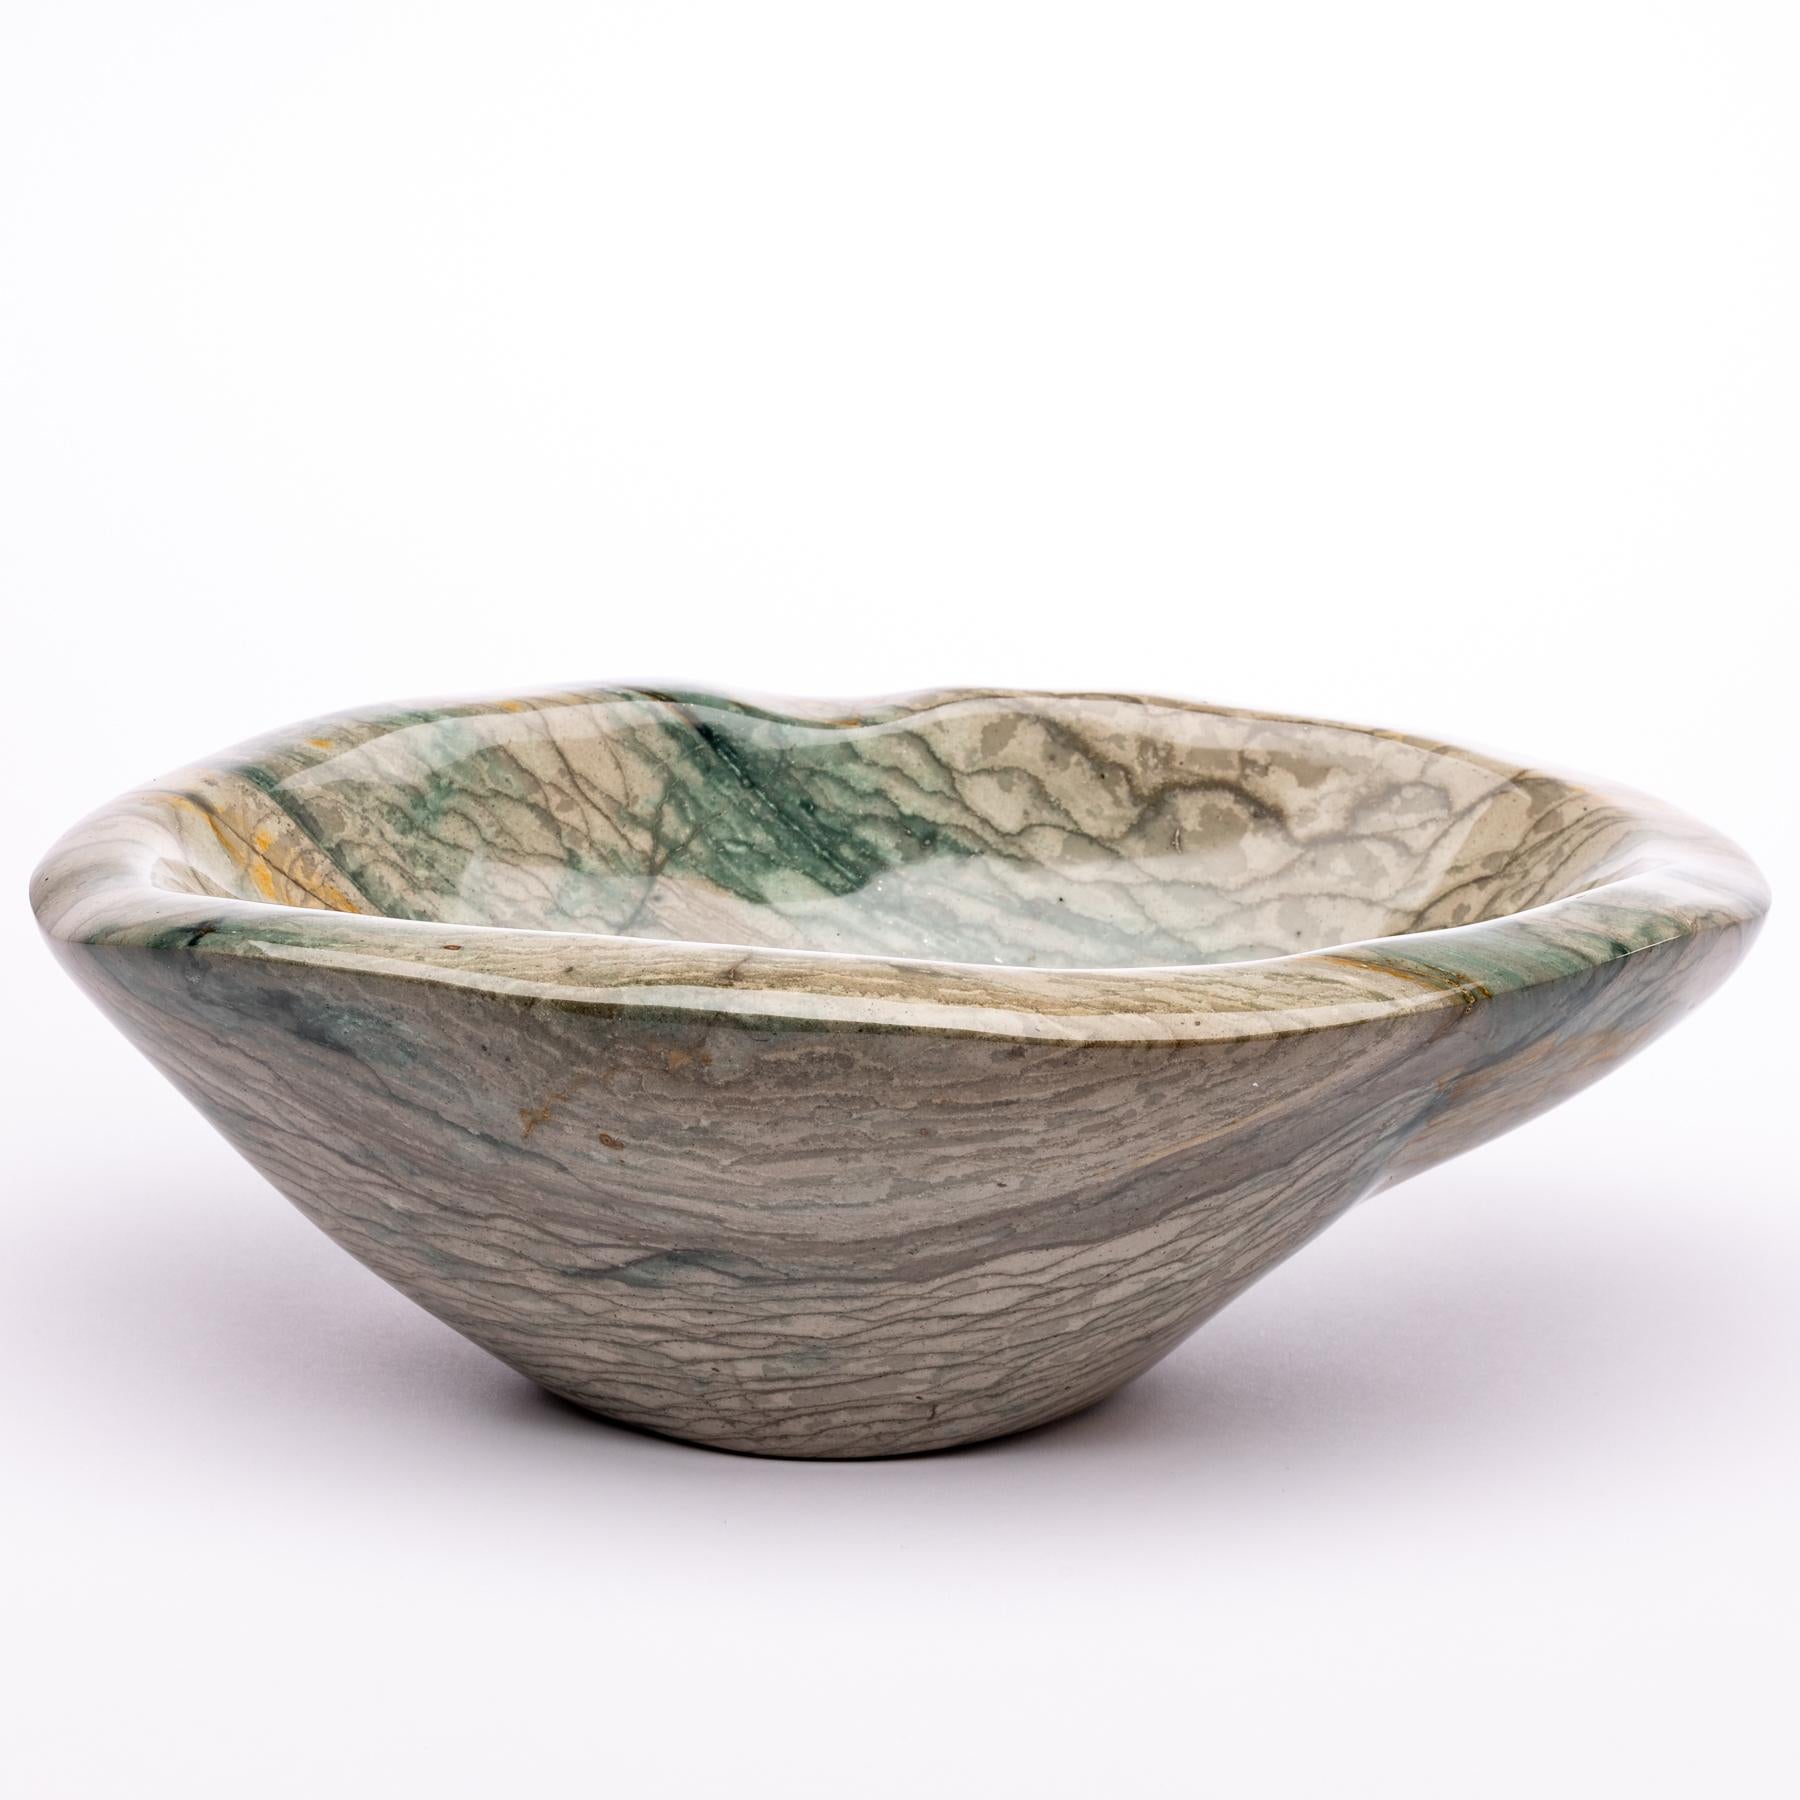 Beautiful one of a kind, green and white shade jasper handcrafted bowl from Madagascar.